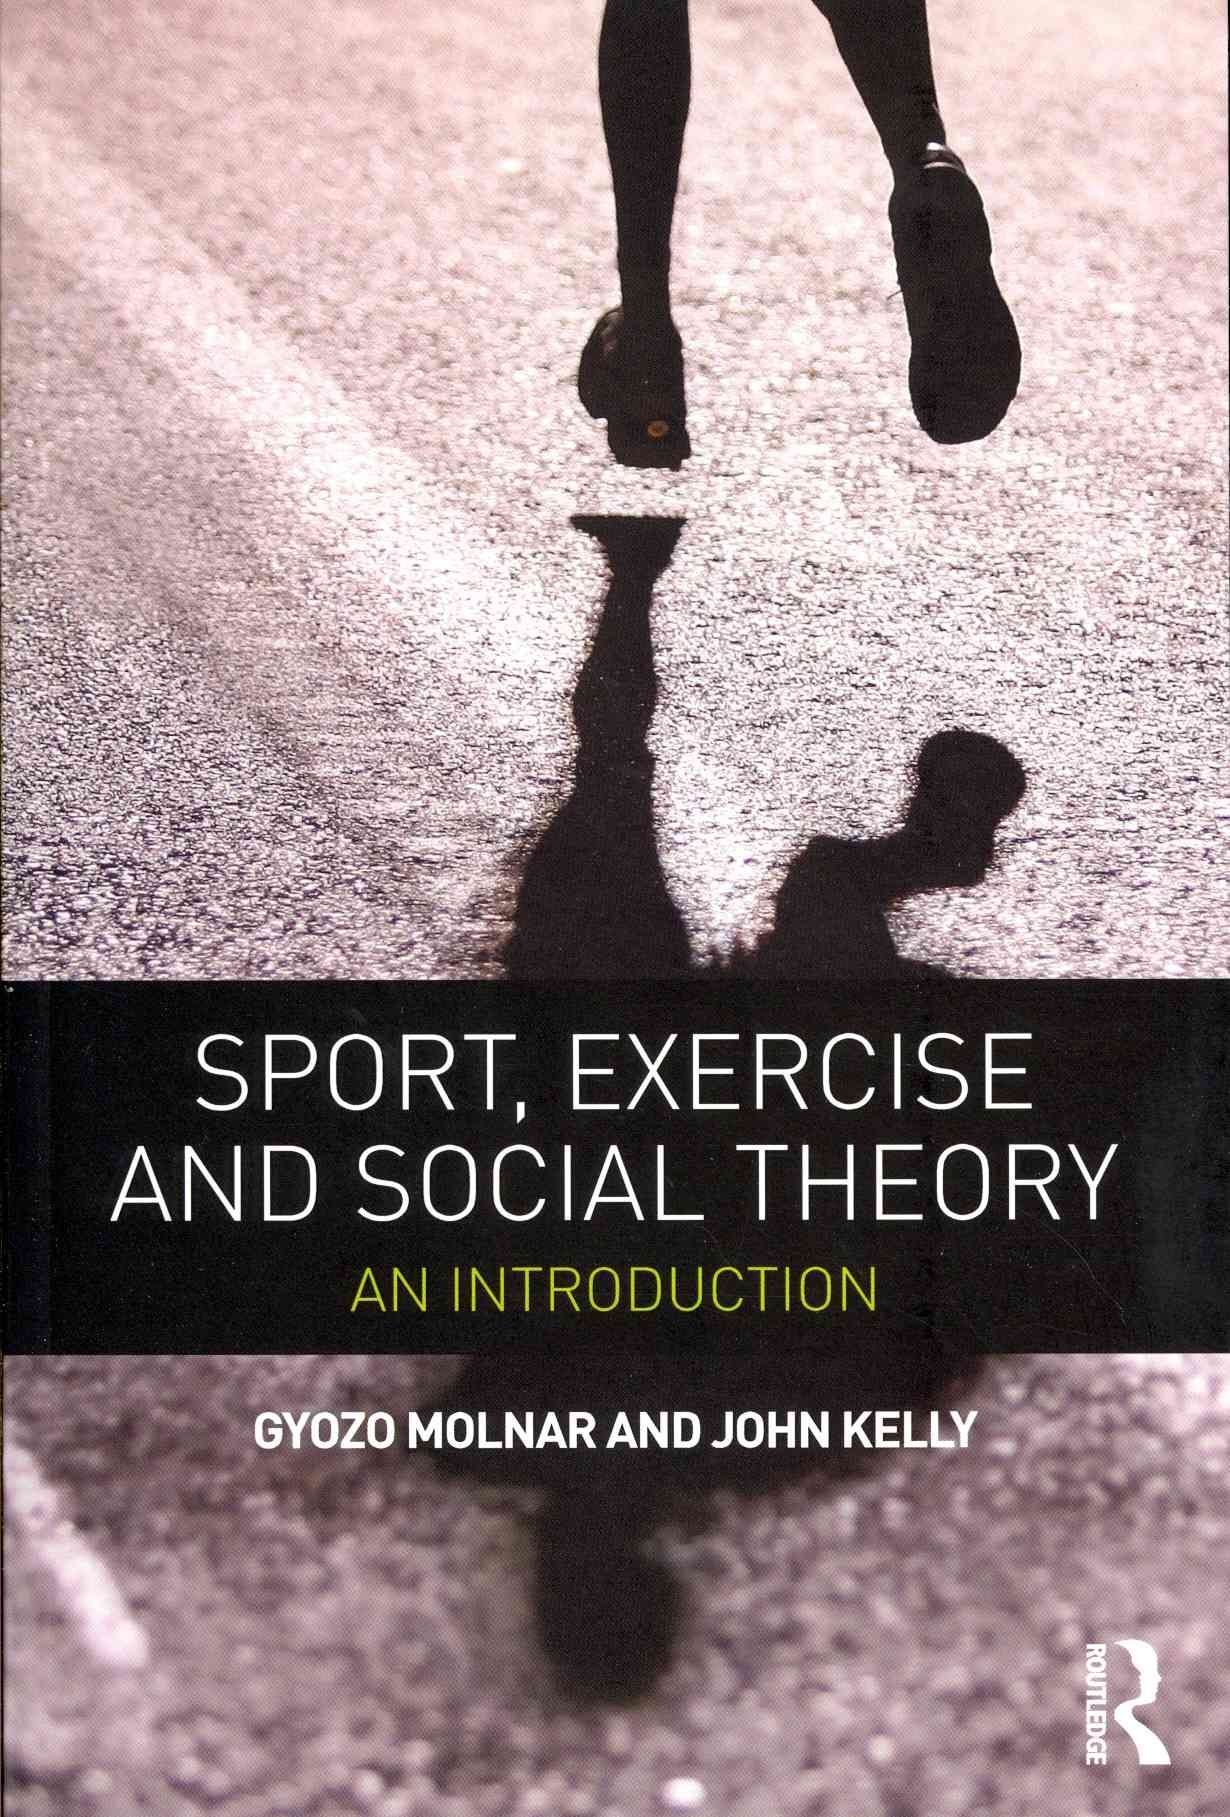 Sport, Exercise and Social Theory